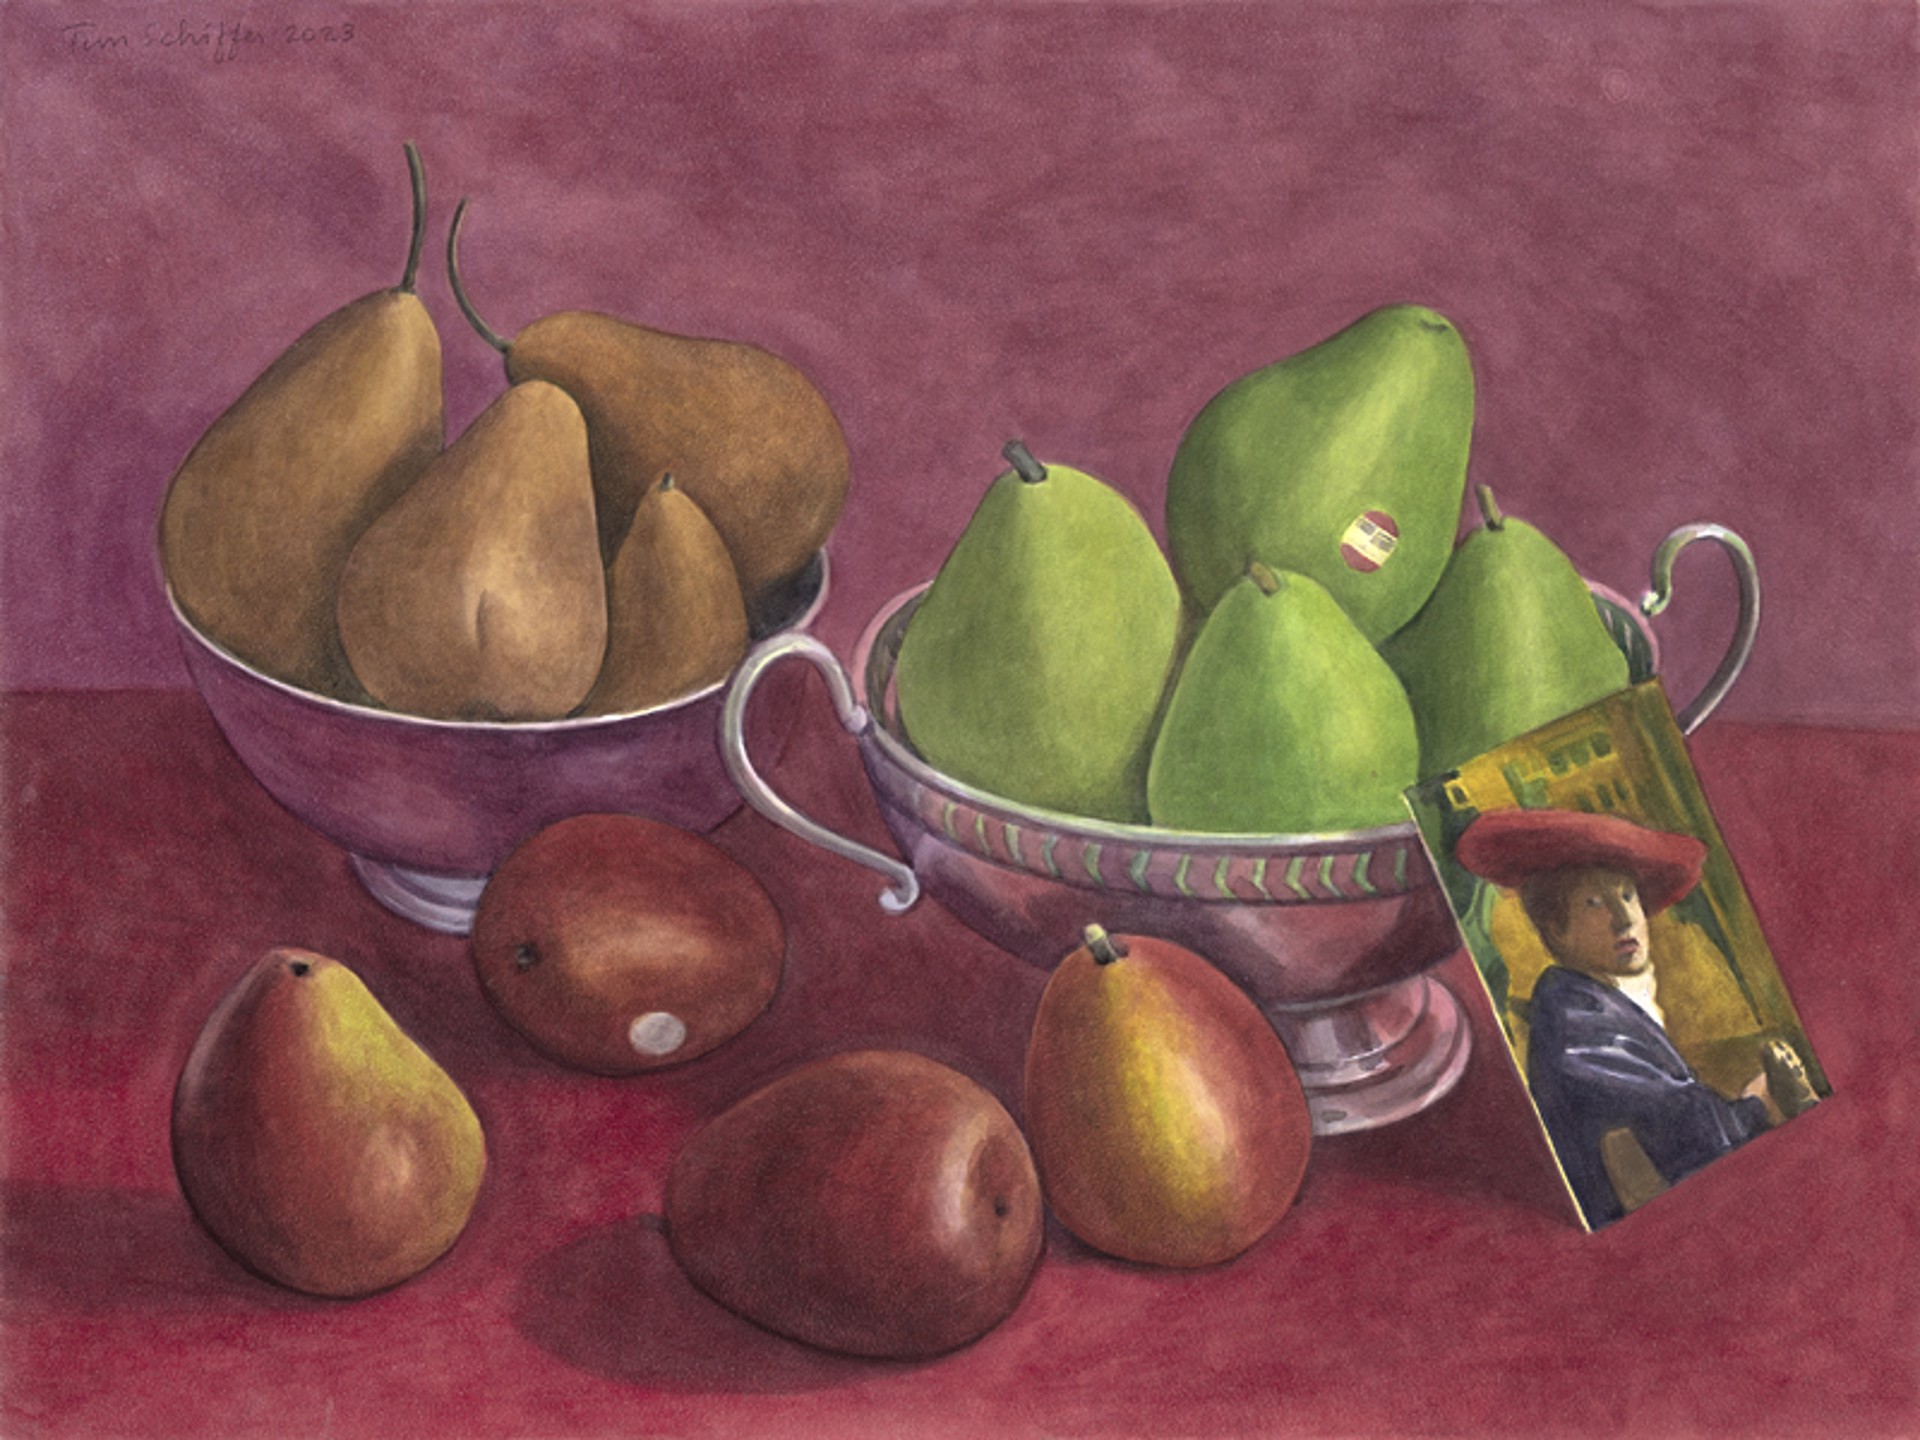 Three Kinds of Pears with a Postcard by Vermeer by Tim Schiffer